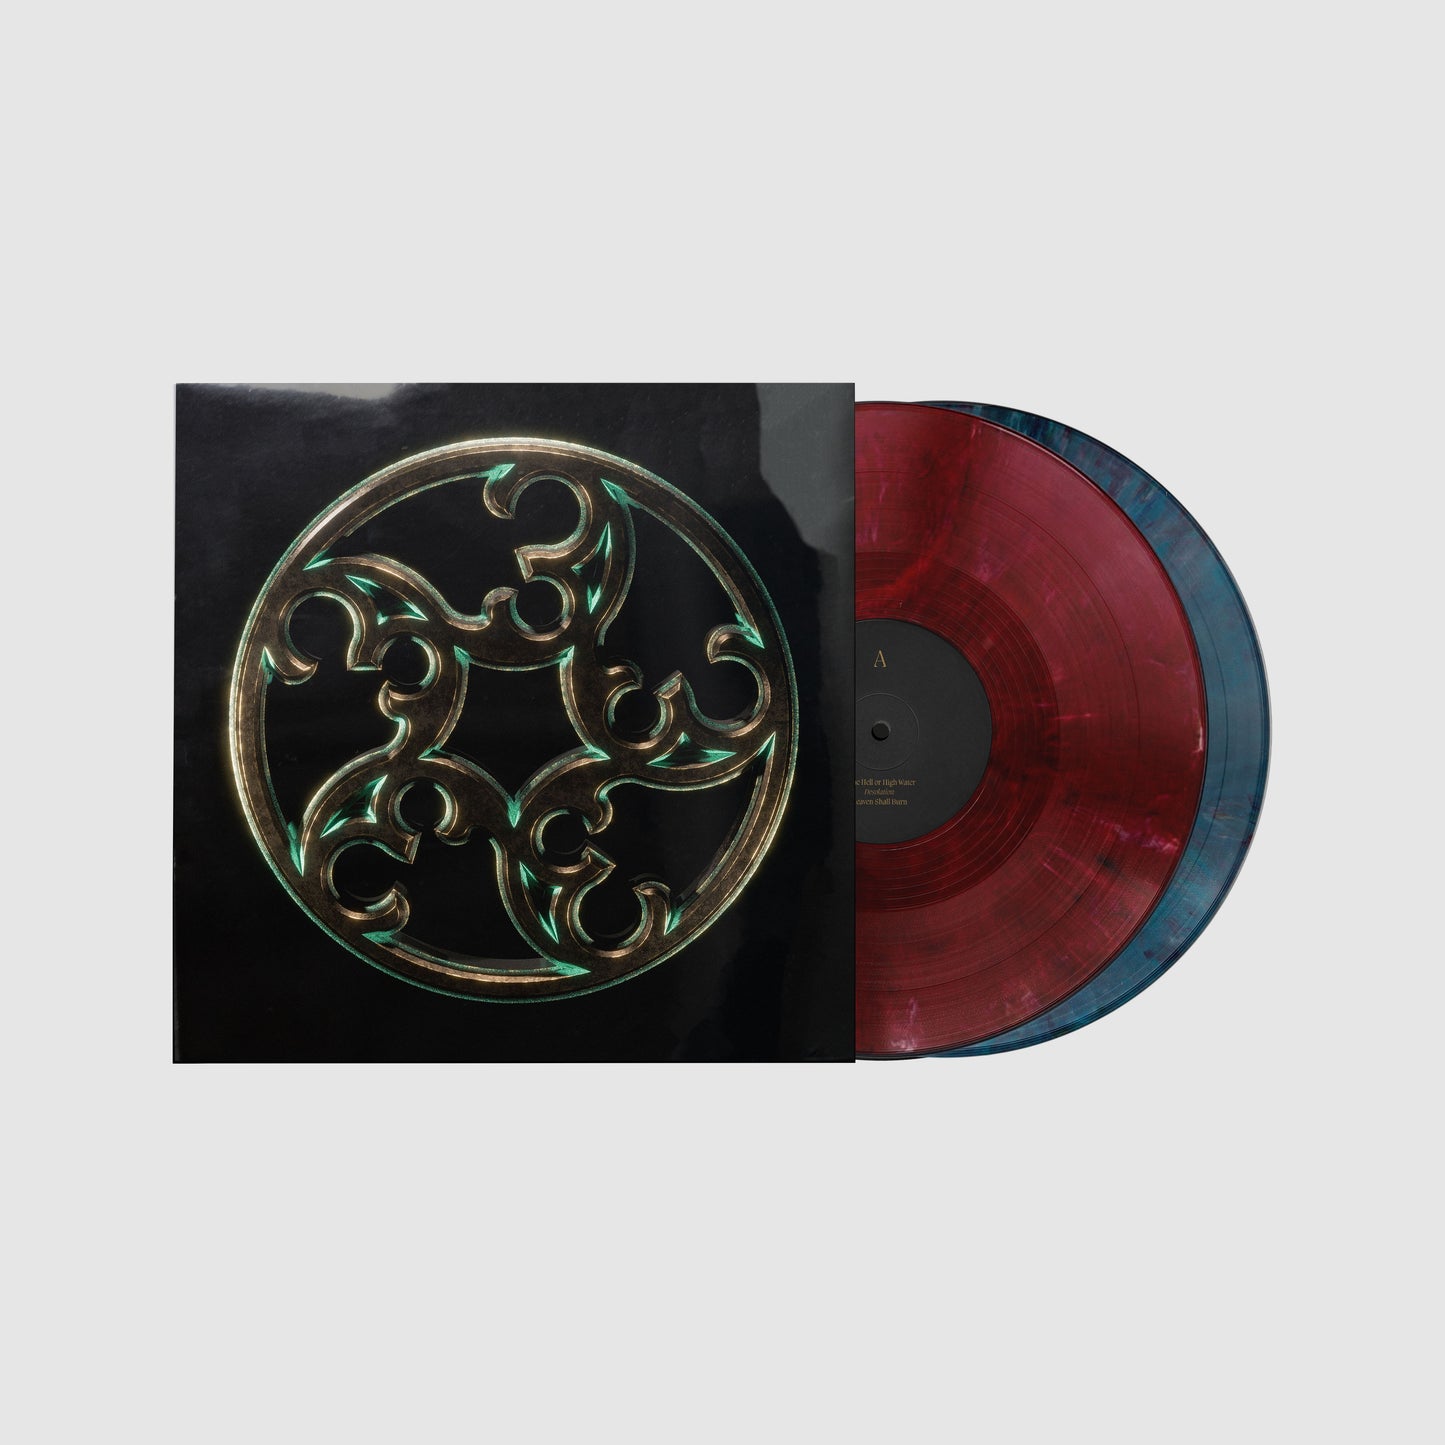 The Black - Limited Colored ReVinyl (Signed)